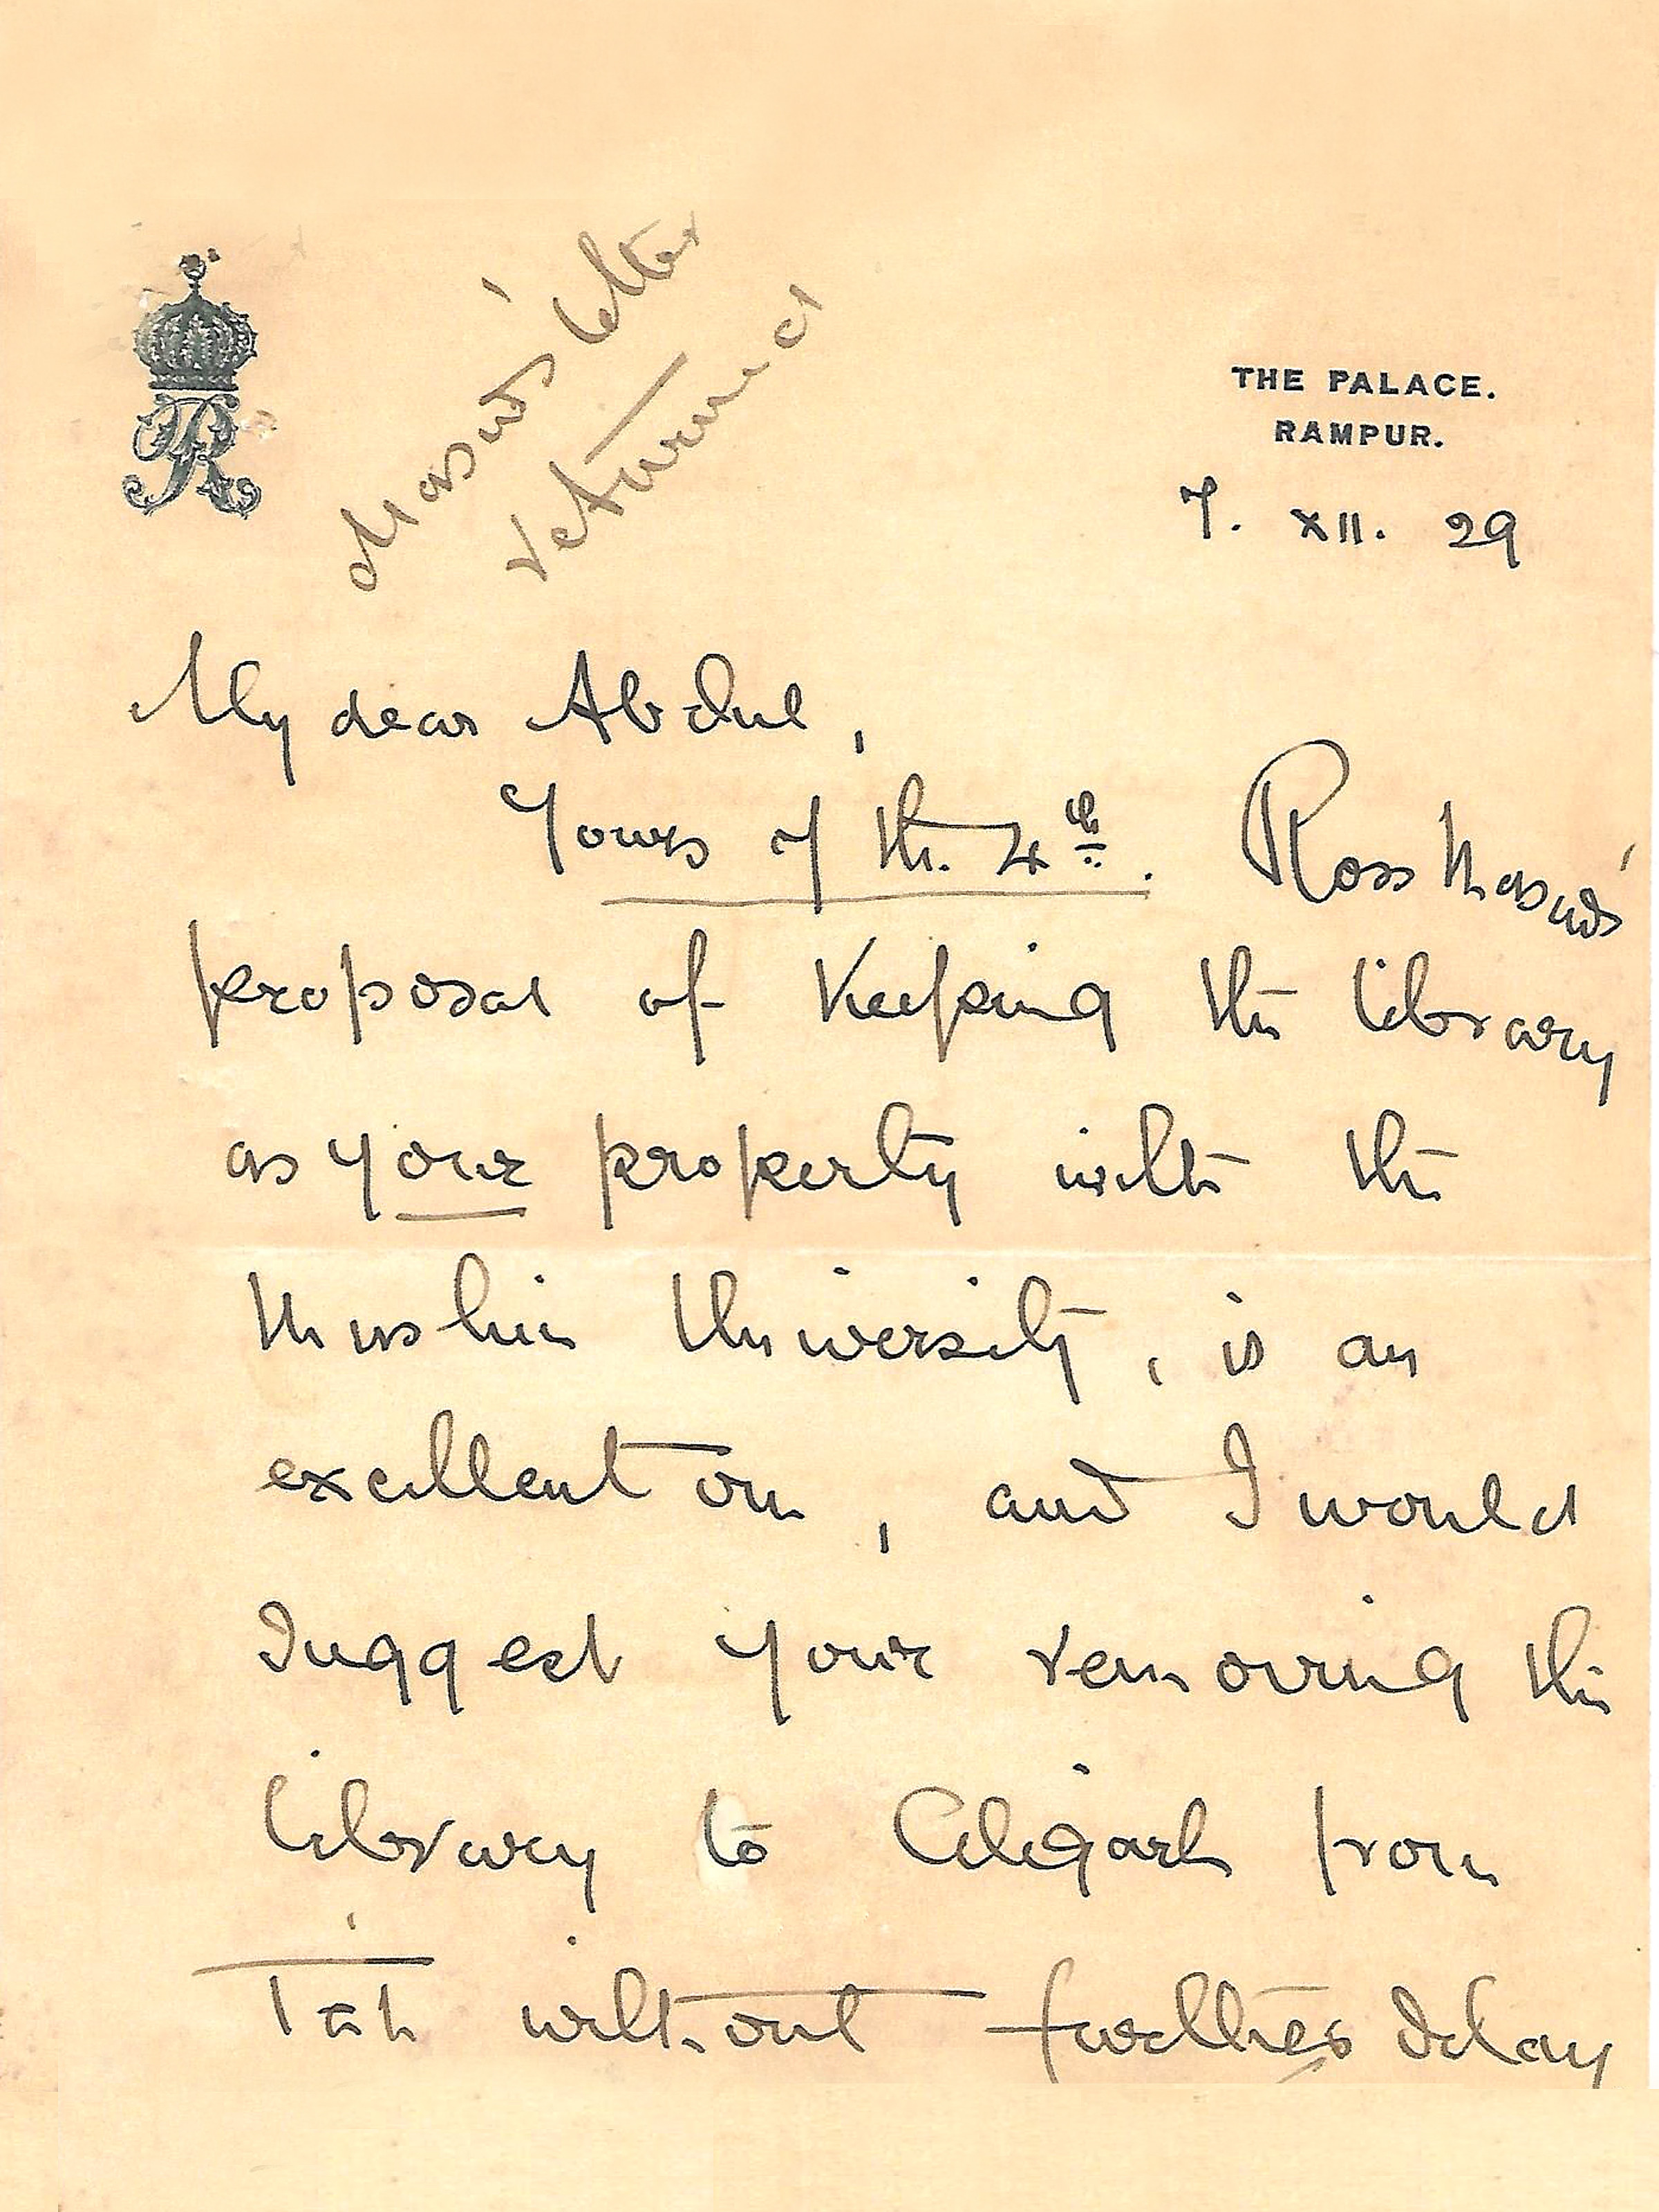 Letter by Sir Samad to his brother dated 7 December 1939 on the offer by Sir Ross Masood, VC Aligarh University to include the valuable collection of their father’s books in the university’s Maulana Azad Library.